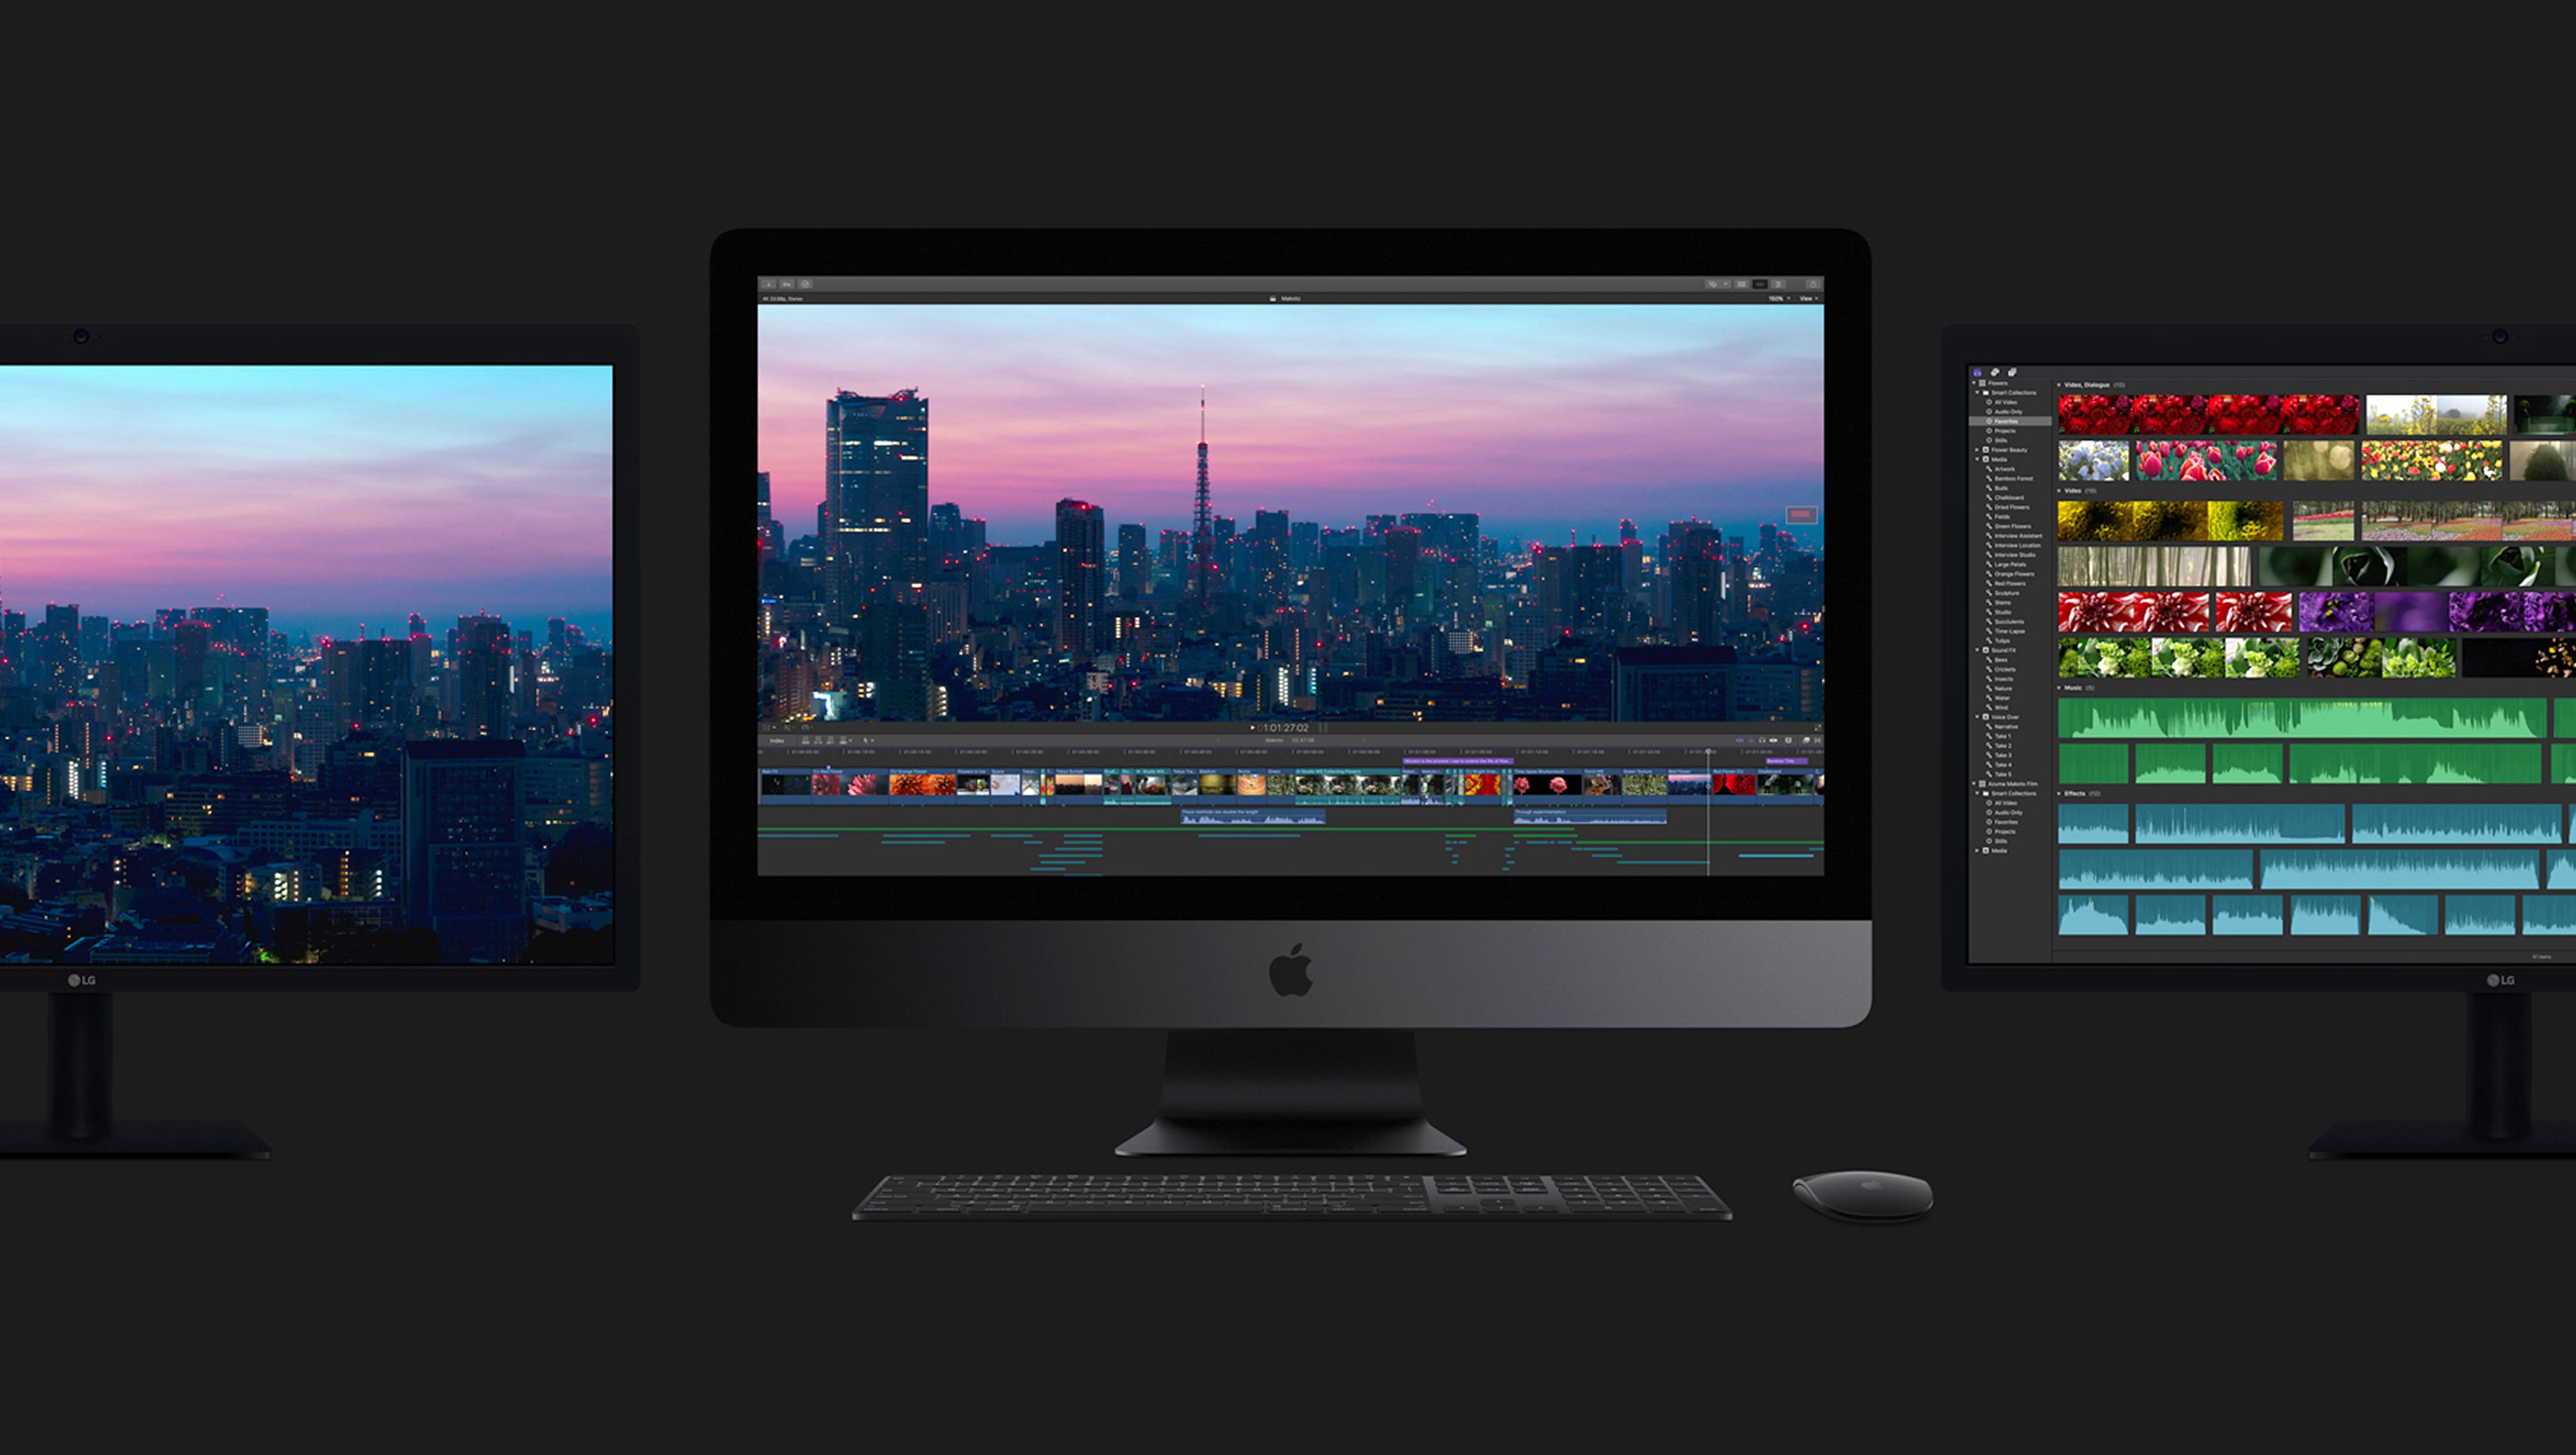 A handout photo made available by APPLE shows Apple's new iMac Pro which was introduced during the keynote address at the Worldwide Developers Conference. The iMac Pro is described by Apple as a workstation-class product line for pro users with a 27-inch 4K display, up to 18-core Xeon processors with 22 Teraflops of graphics computation. It is scheduled for December 2017 shipping starting at $4,999.